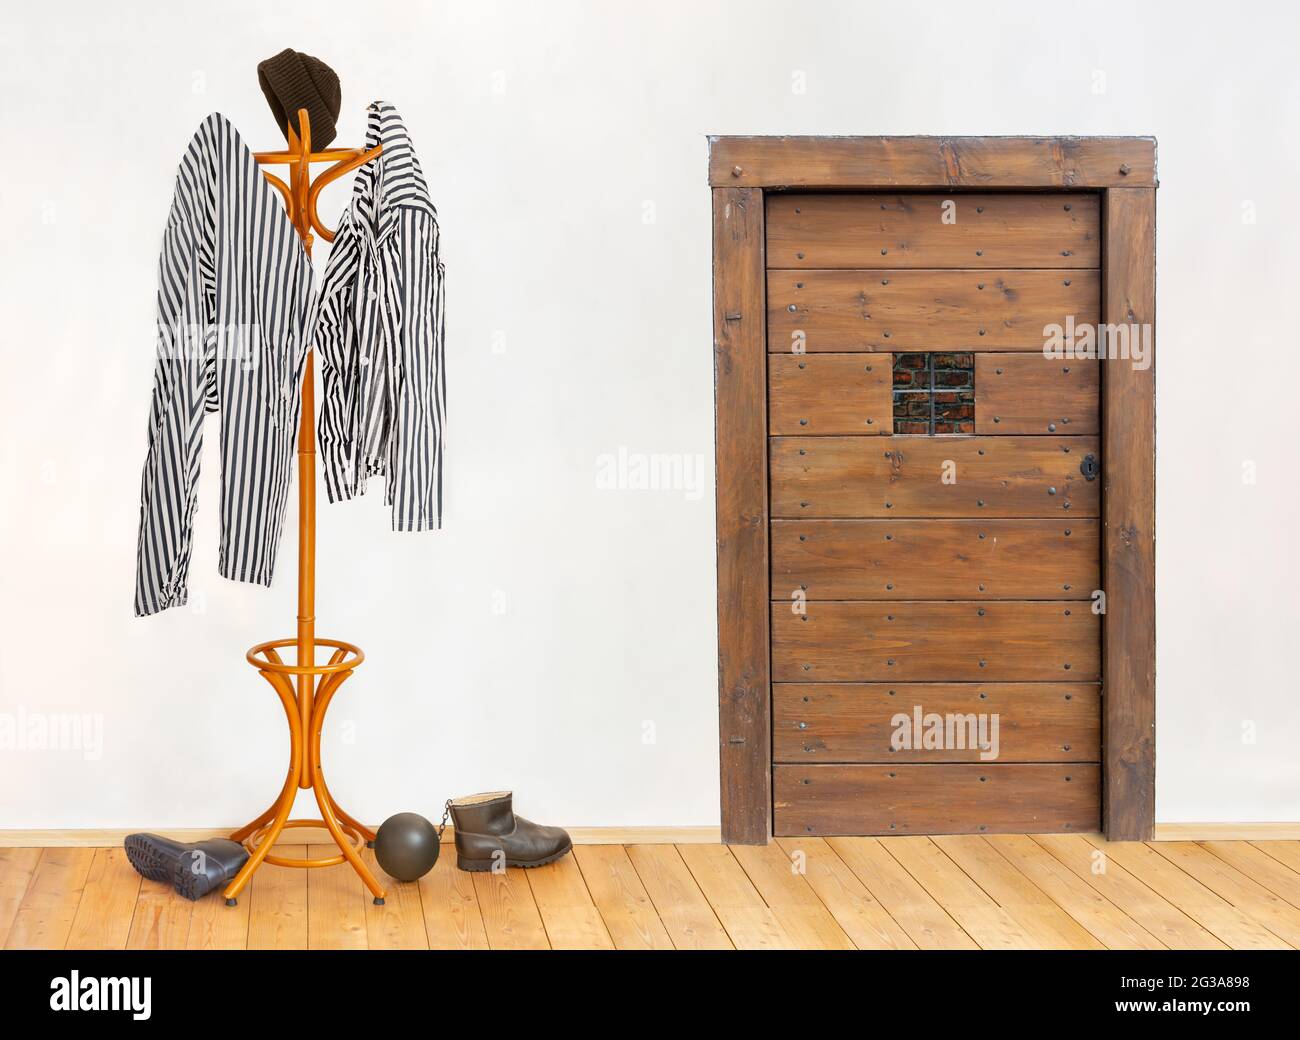 The striped prisoners costume hangs on the coat hook in an cell with door with a small window. Stock Photo